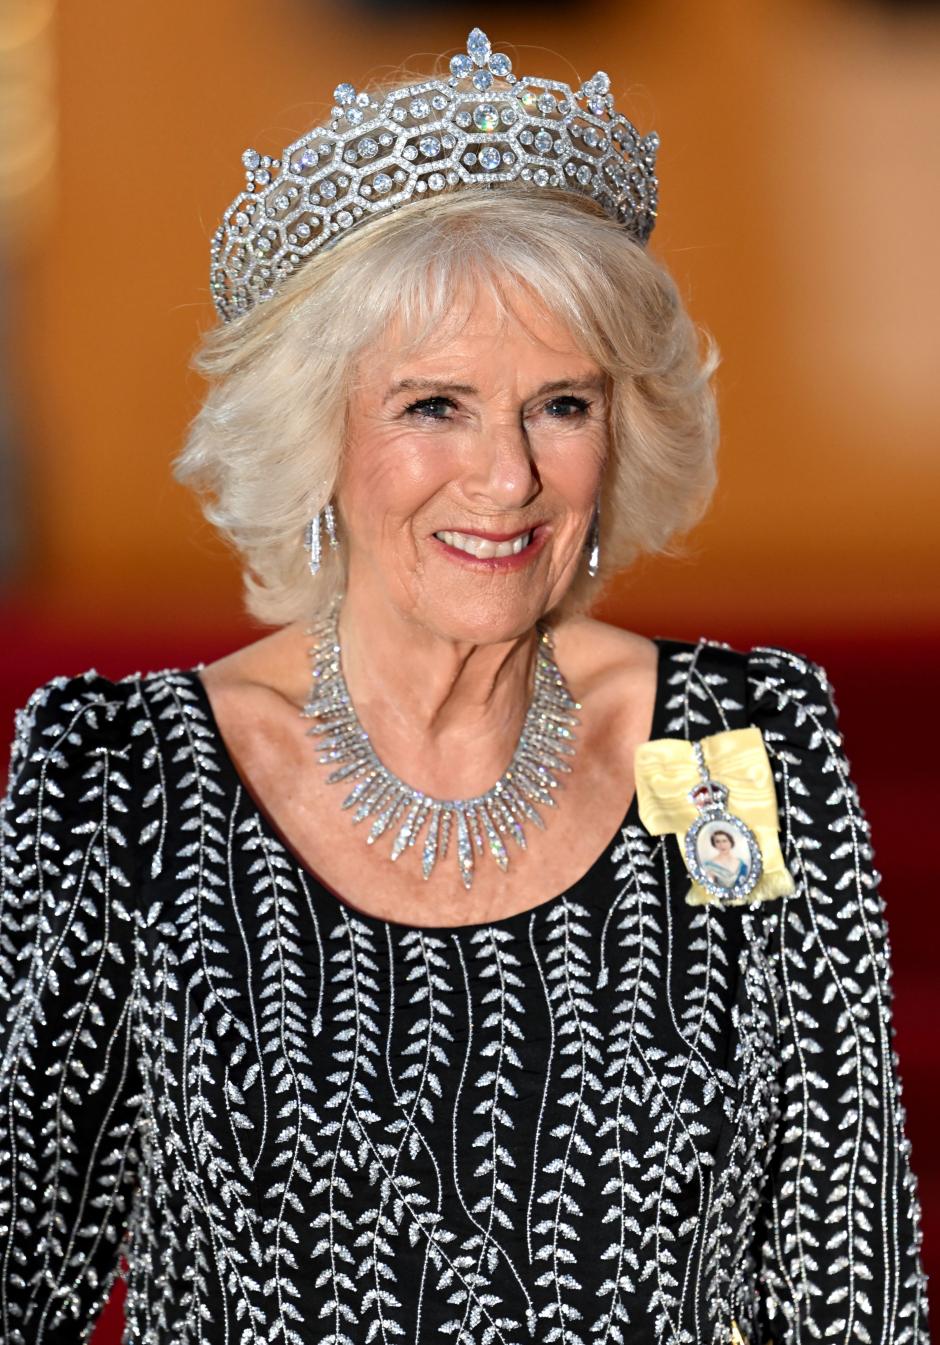 Camilla Queen Consort attending a State Banquet in Berlin during a oficial visit to Germany - 29 Mar 2023